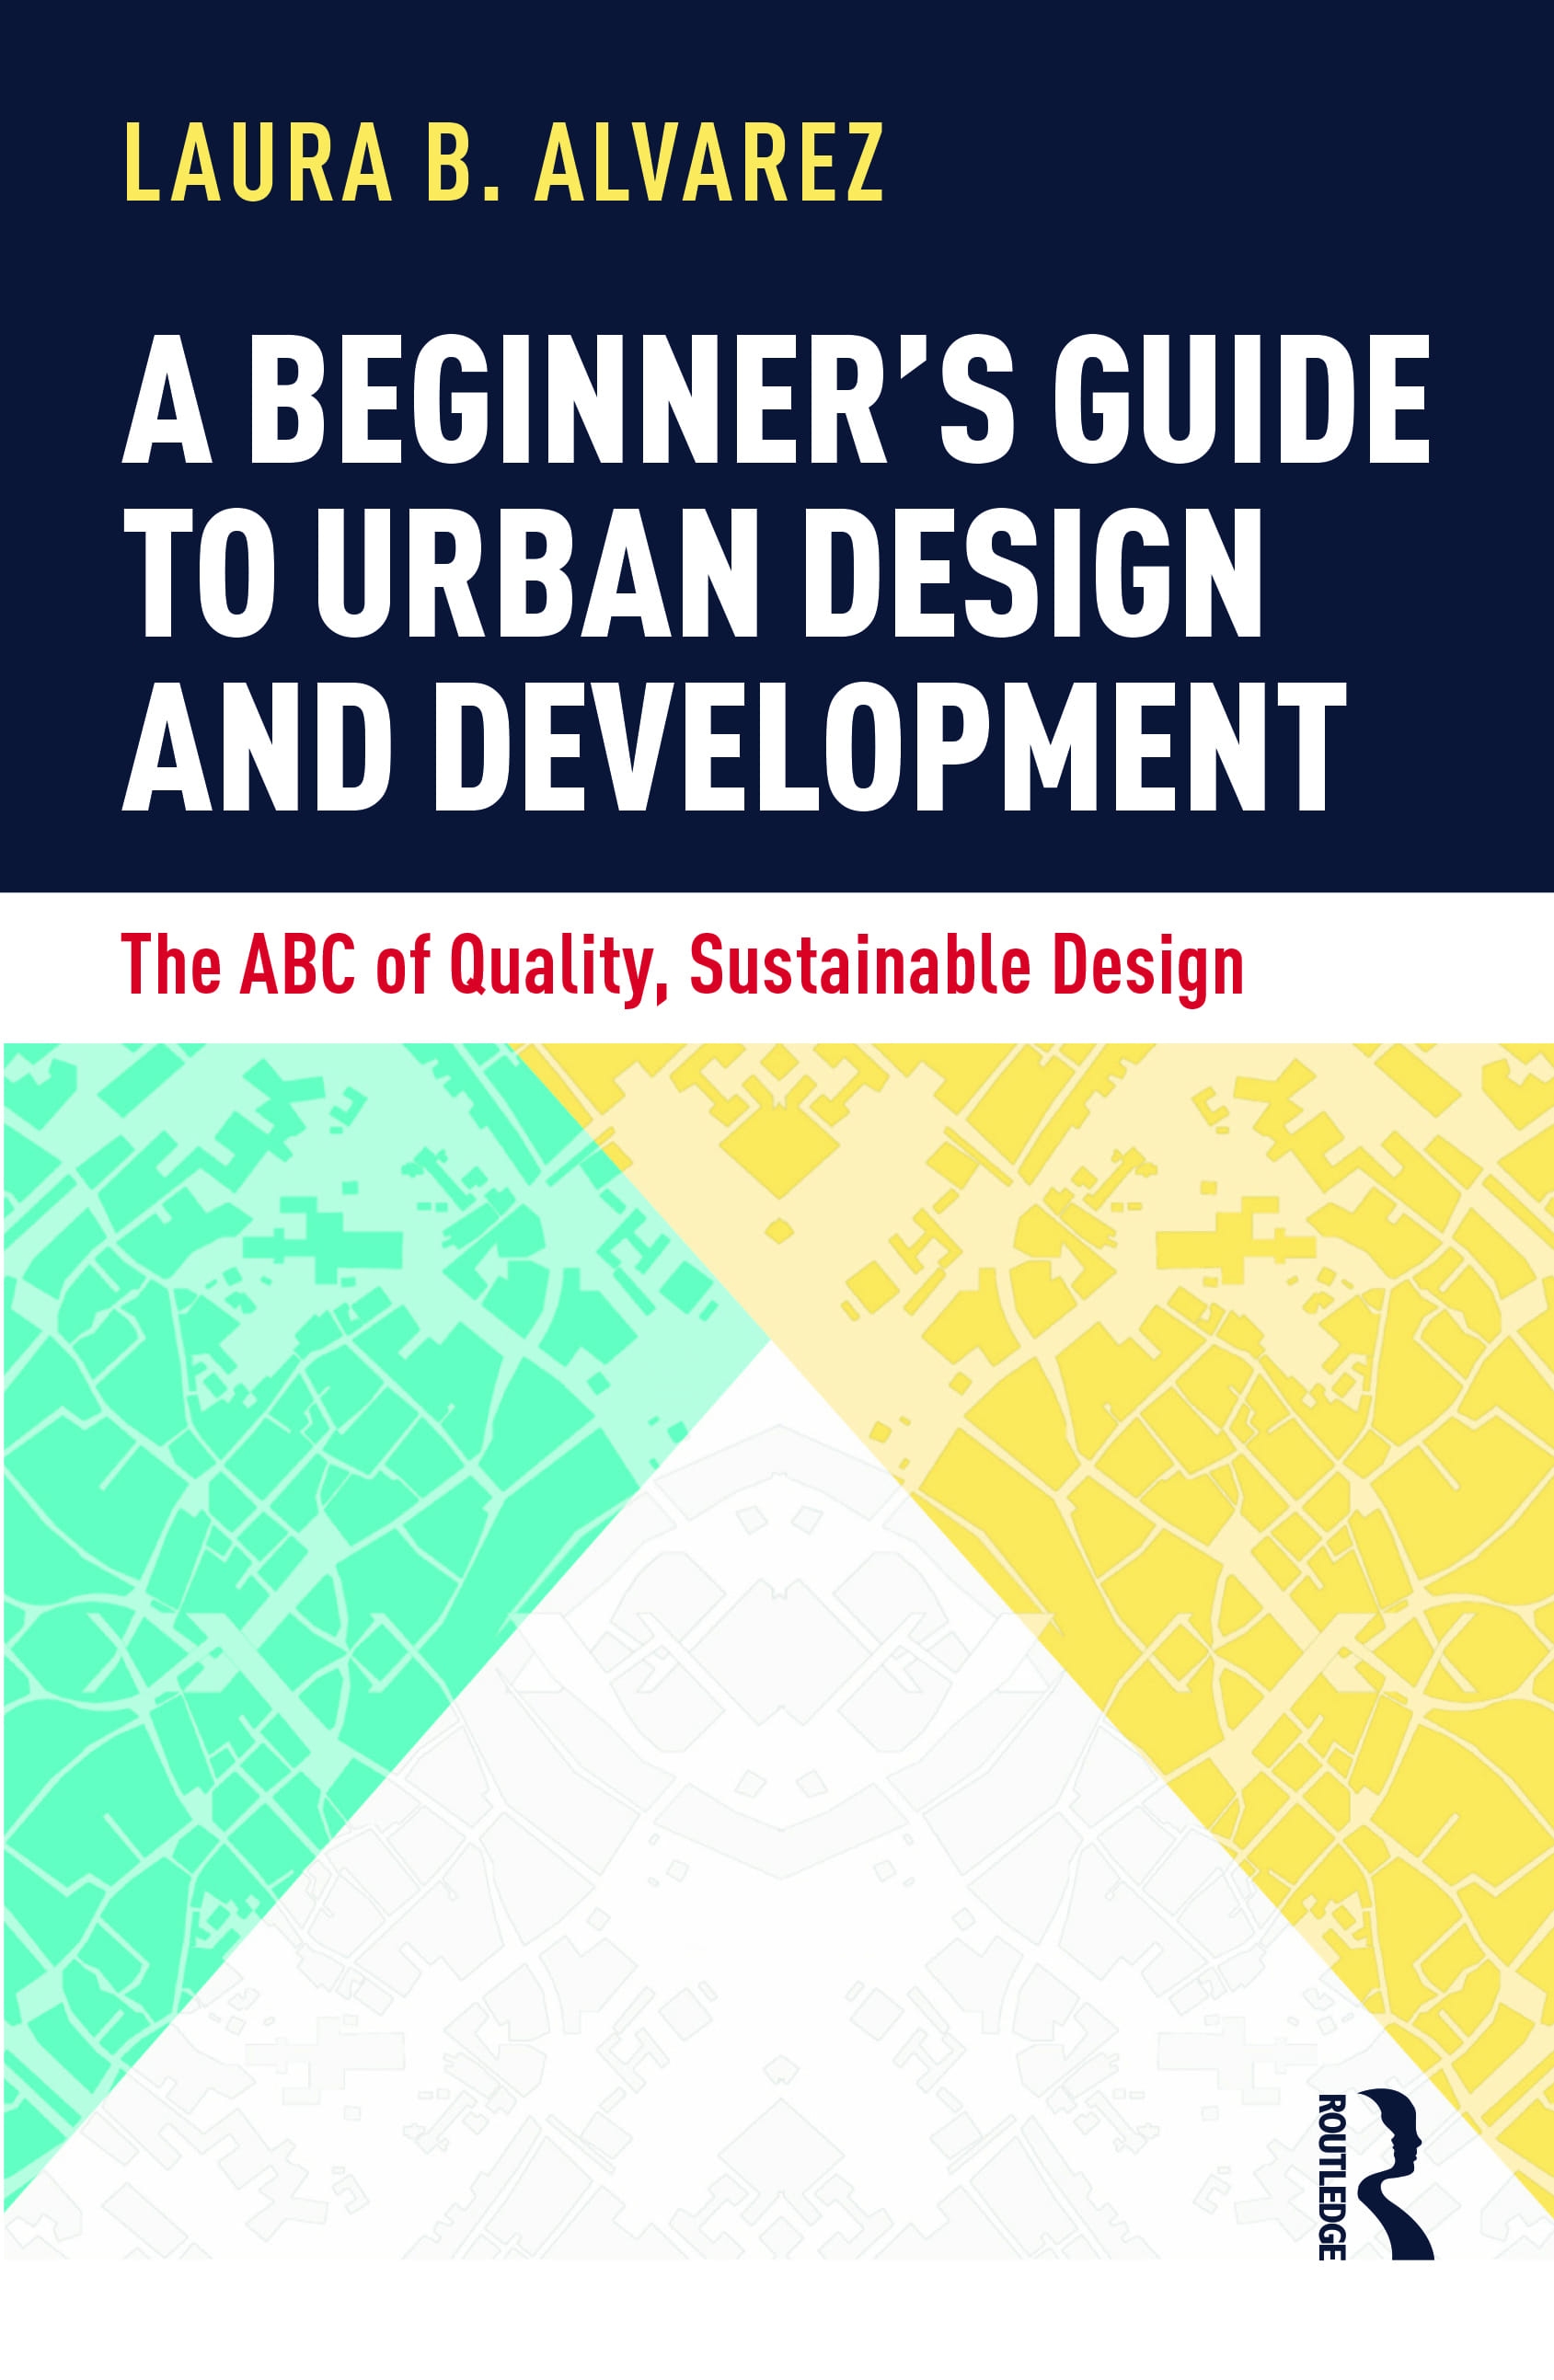 A Beginner’s Guide to Urban Design and Development: The ABC of Quality, Sustainable Design